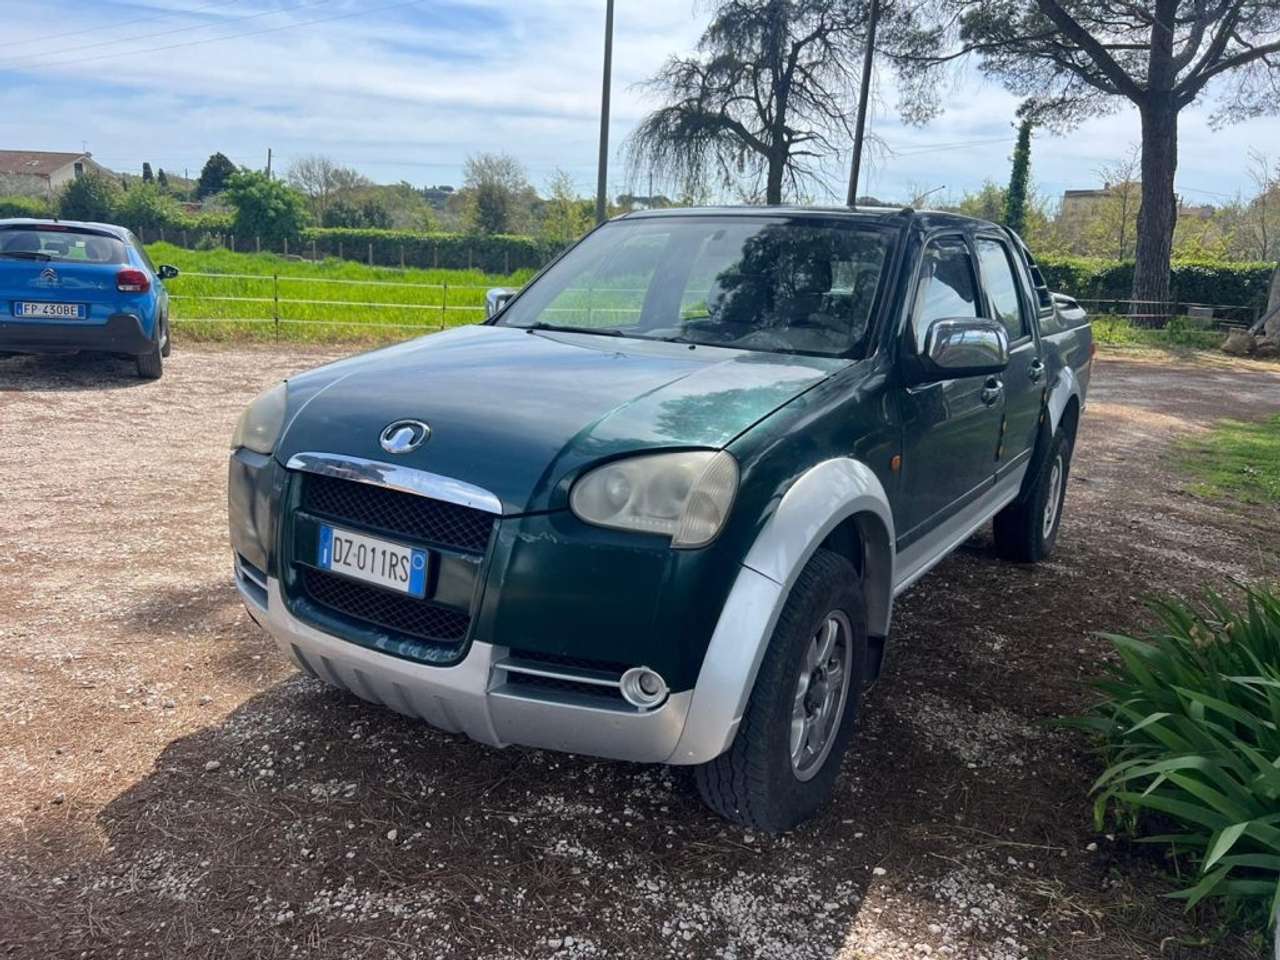 Great Wall Steed DC 2.4 4x4 Super Luxury